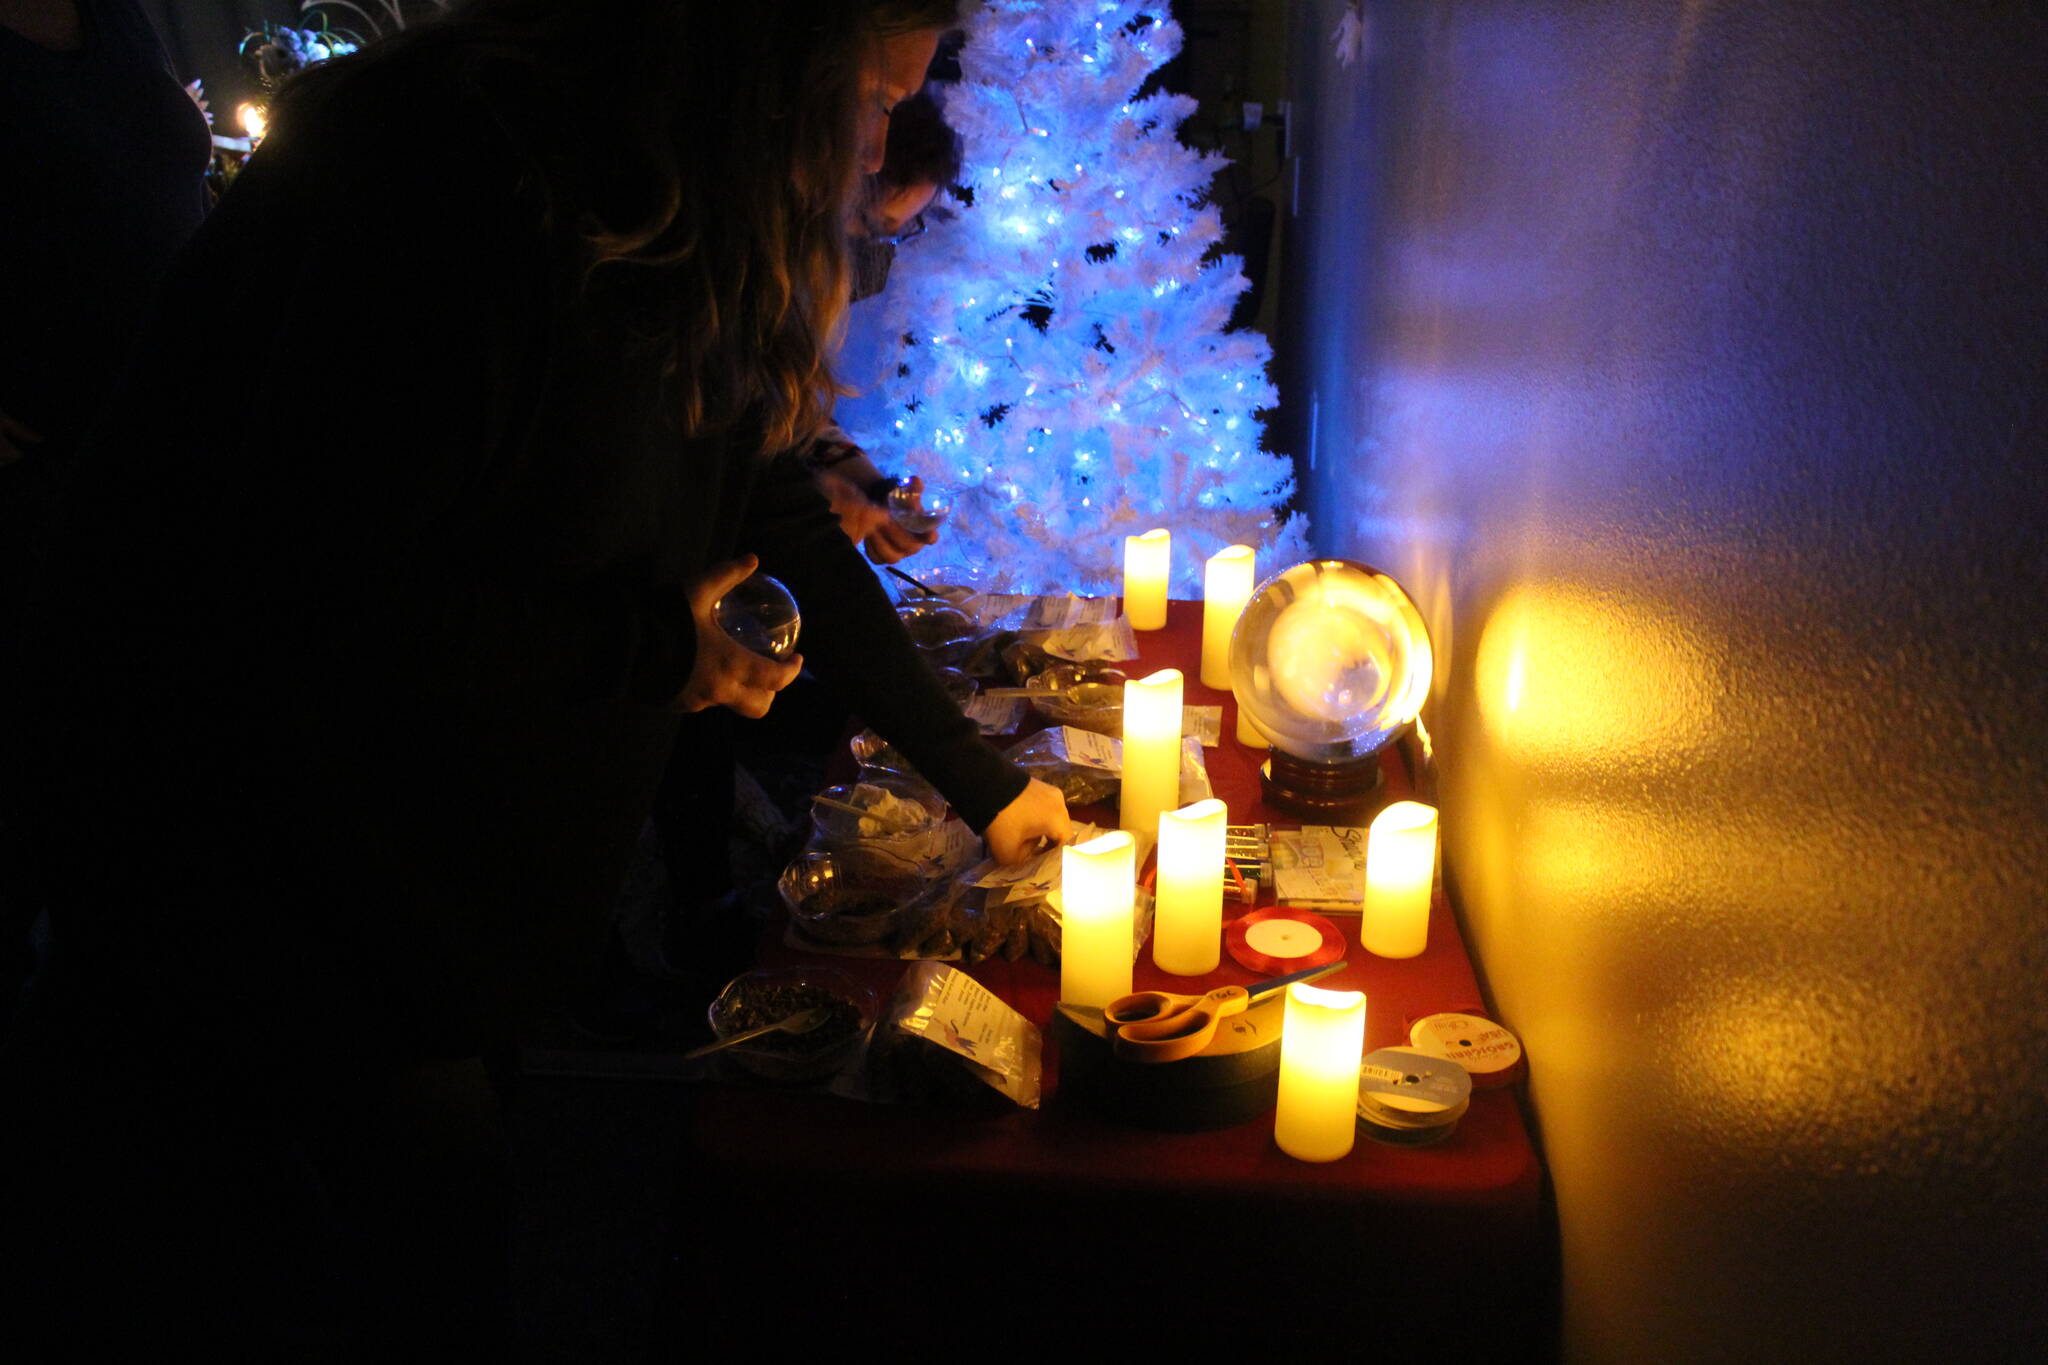 Guests at the Triple Goddess Coven make their own Witch Orbs to decorate their homes during the holidays. Photo by Bailey Jo Josie/Sound Publishing.